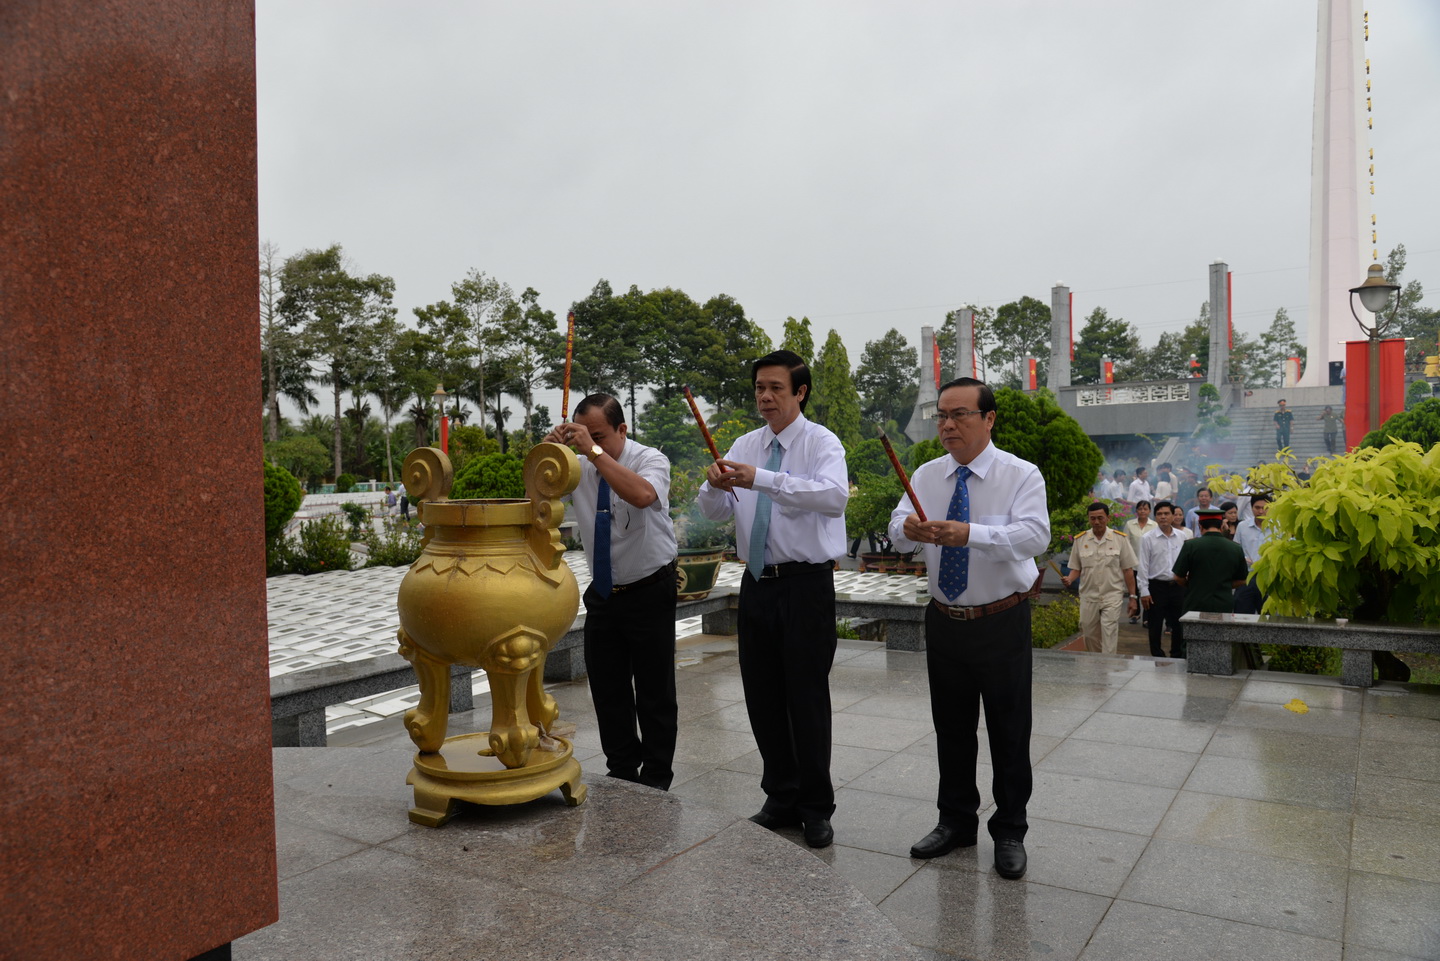 The delegation offered incense at the martyr station to commemorate heroic martyrs. Photo: THUY HA